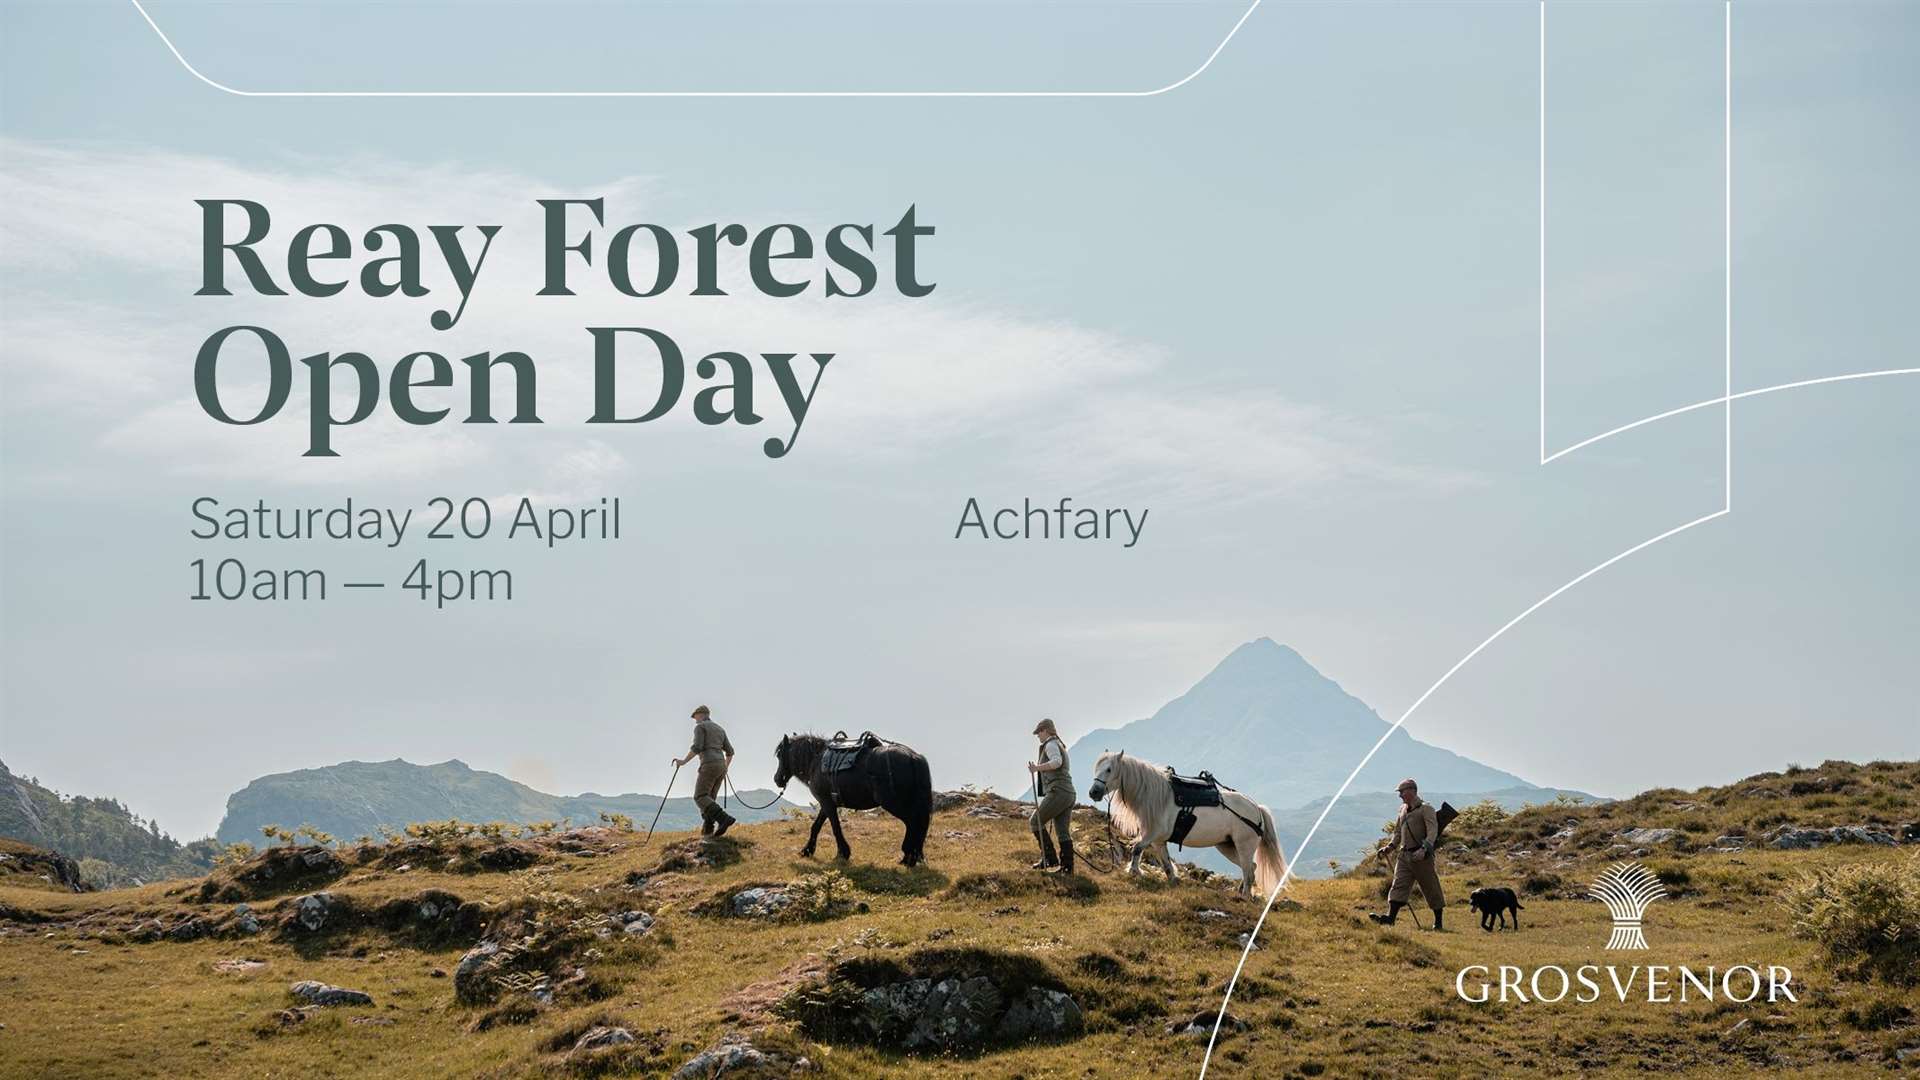 Grosvenor's Reay Forest Estate will showcase the conservation projects it is undertaking at the open day.